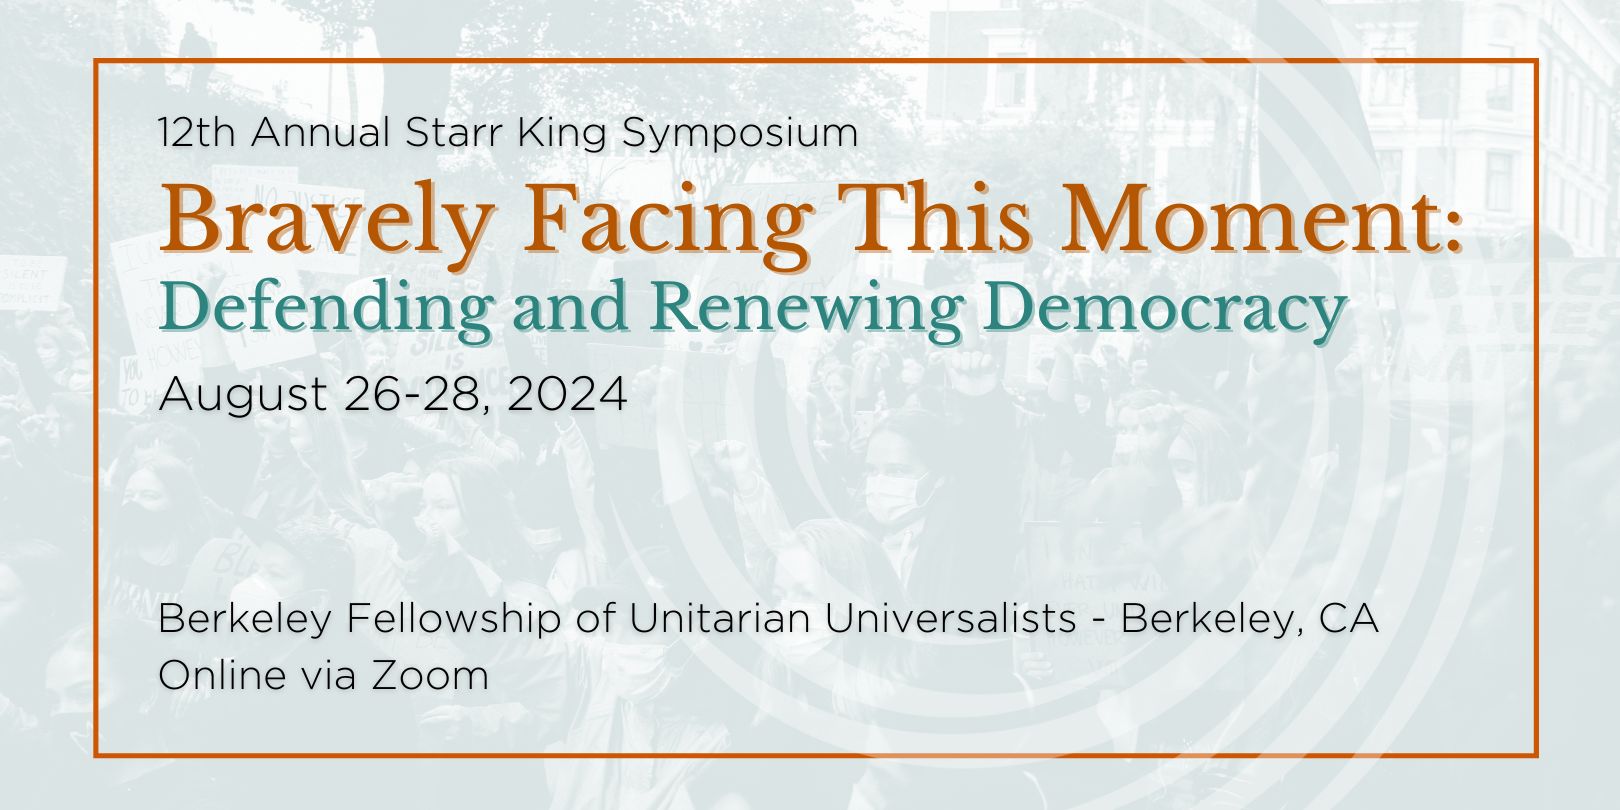 A promotional graphic for the 12th Annual Starr King Symposium 2024, titled "Bravely Facing This Moment: Defending and Renewing Democracy." It takes place August 26-28, in Berkeley, CA and Montclair, NJ, with online access via Zoom.